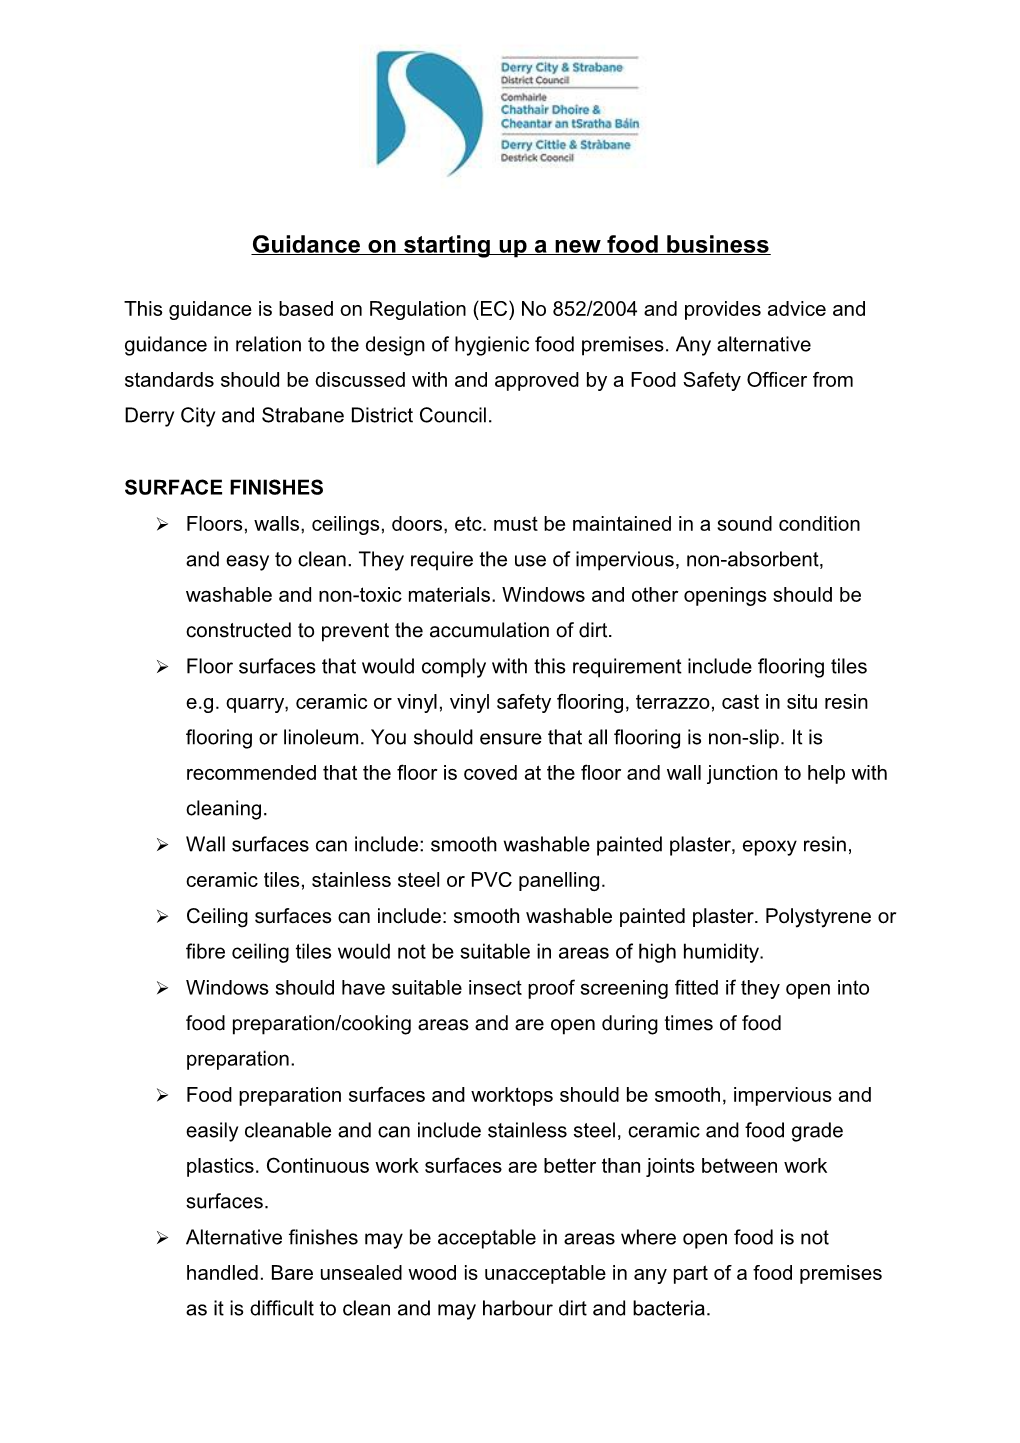 Guidance on Starting up a New Food Business